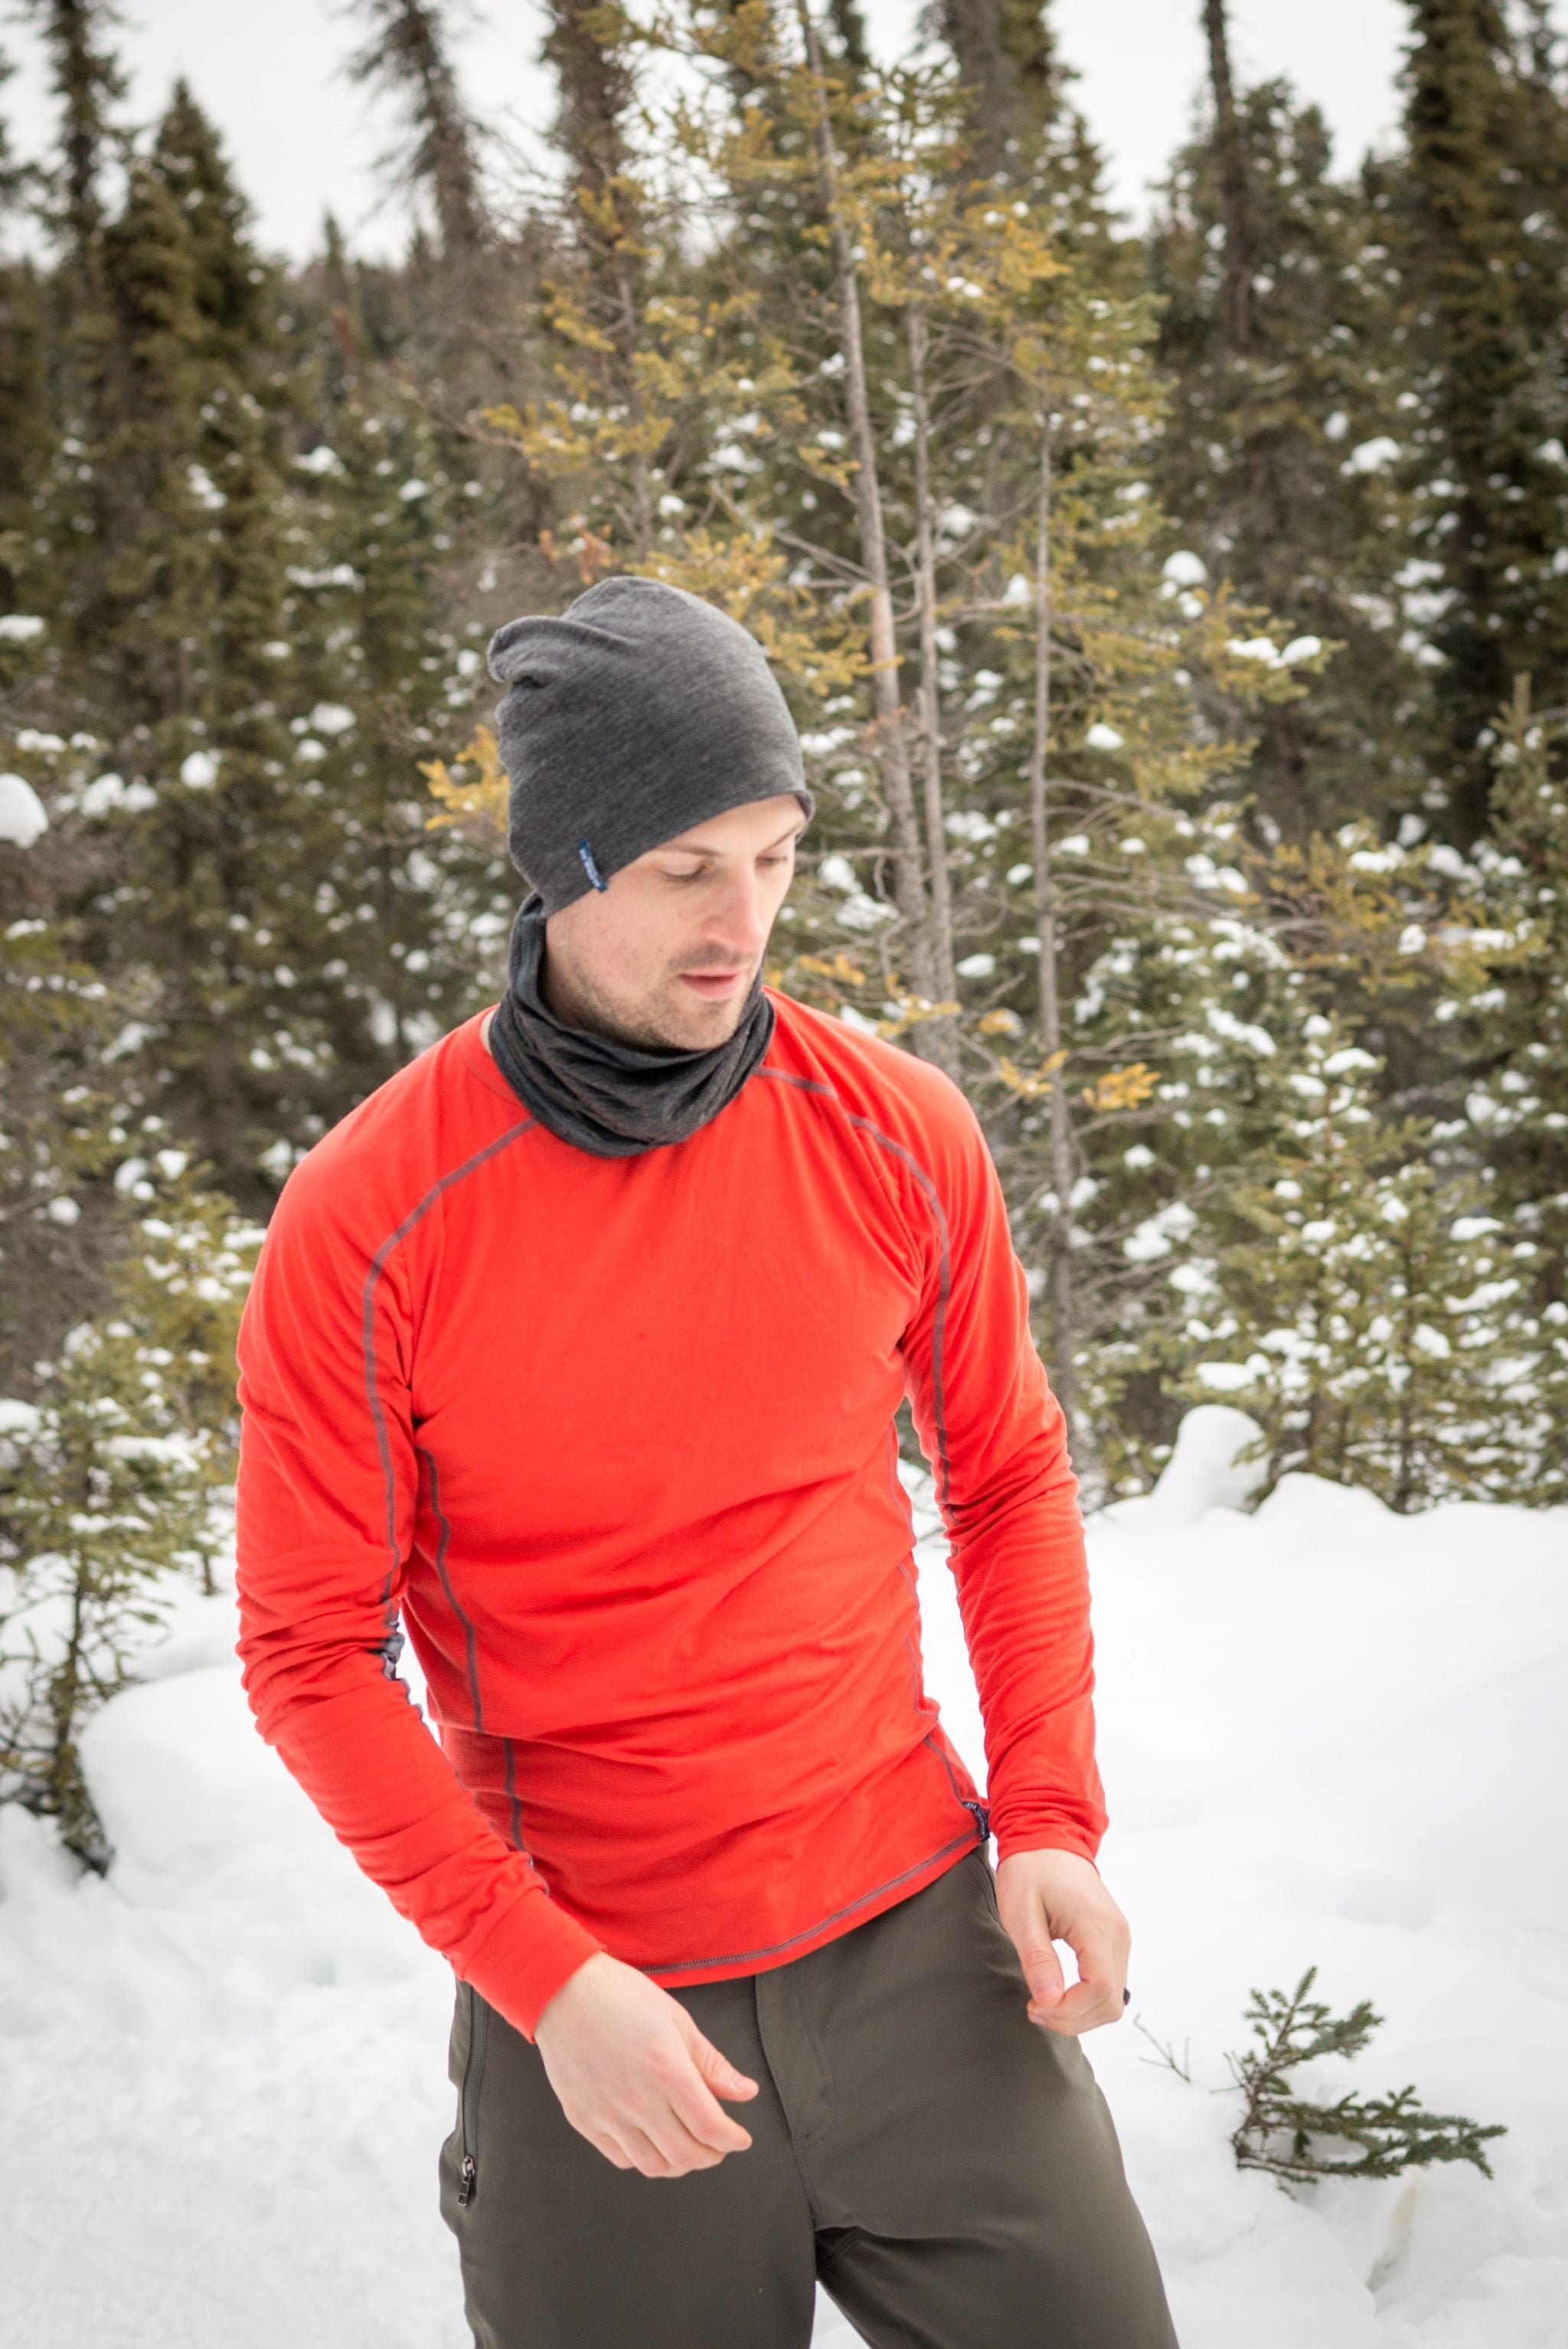 alpine fit merino wool neck gaiter on male model outside with merino wool hat and base layer top